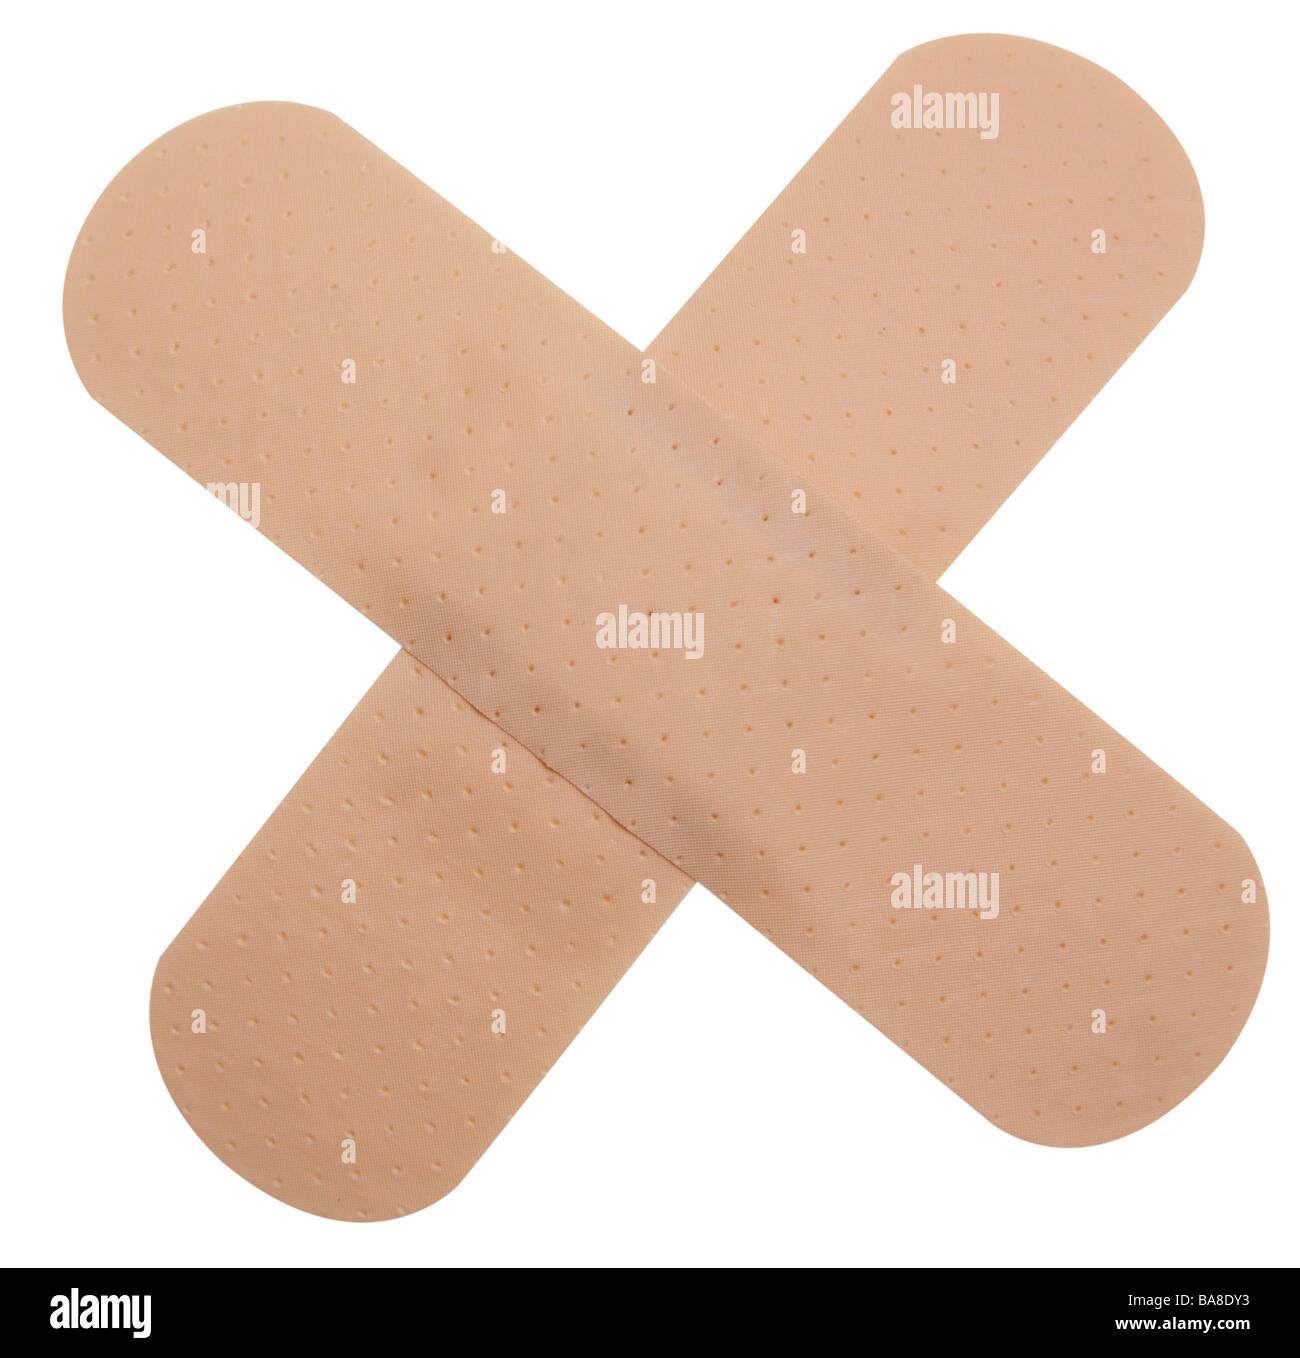 Band aid plaster in shape of cross Stock Photo